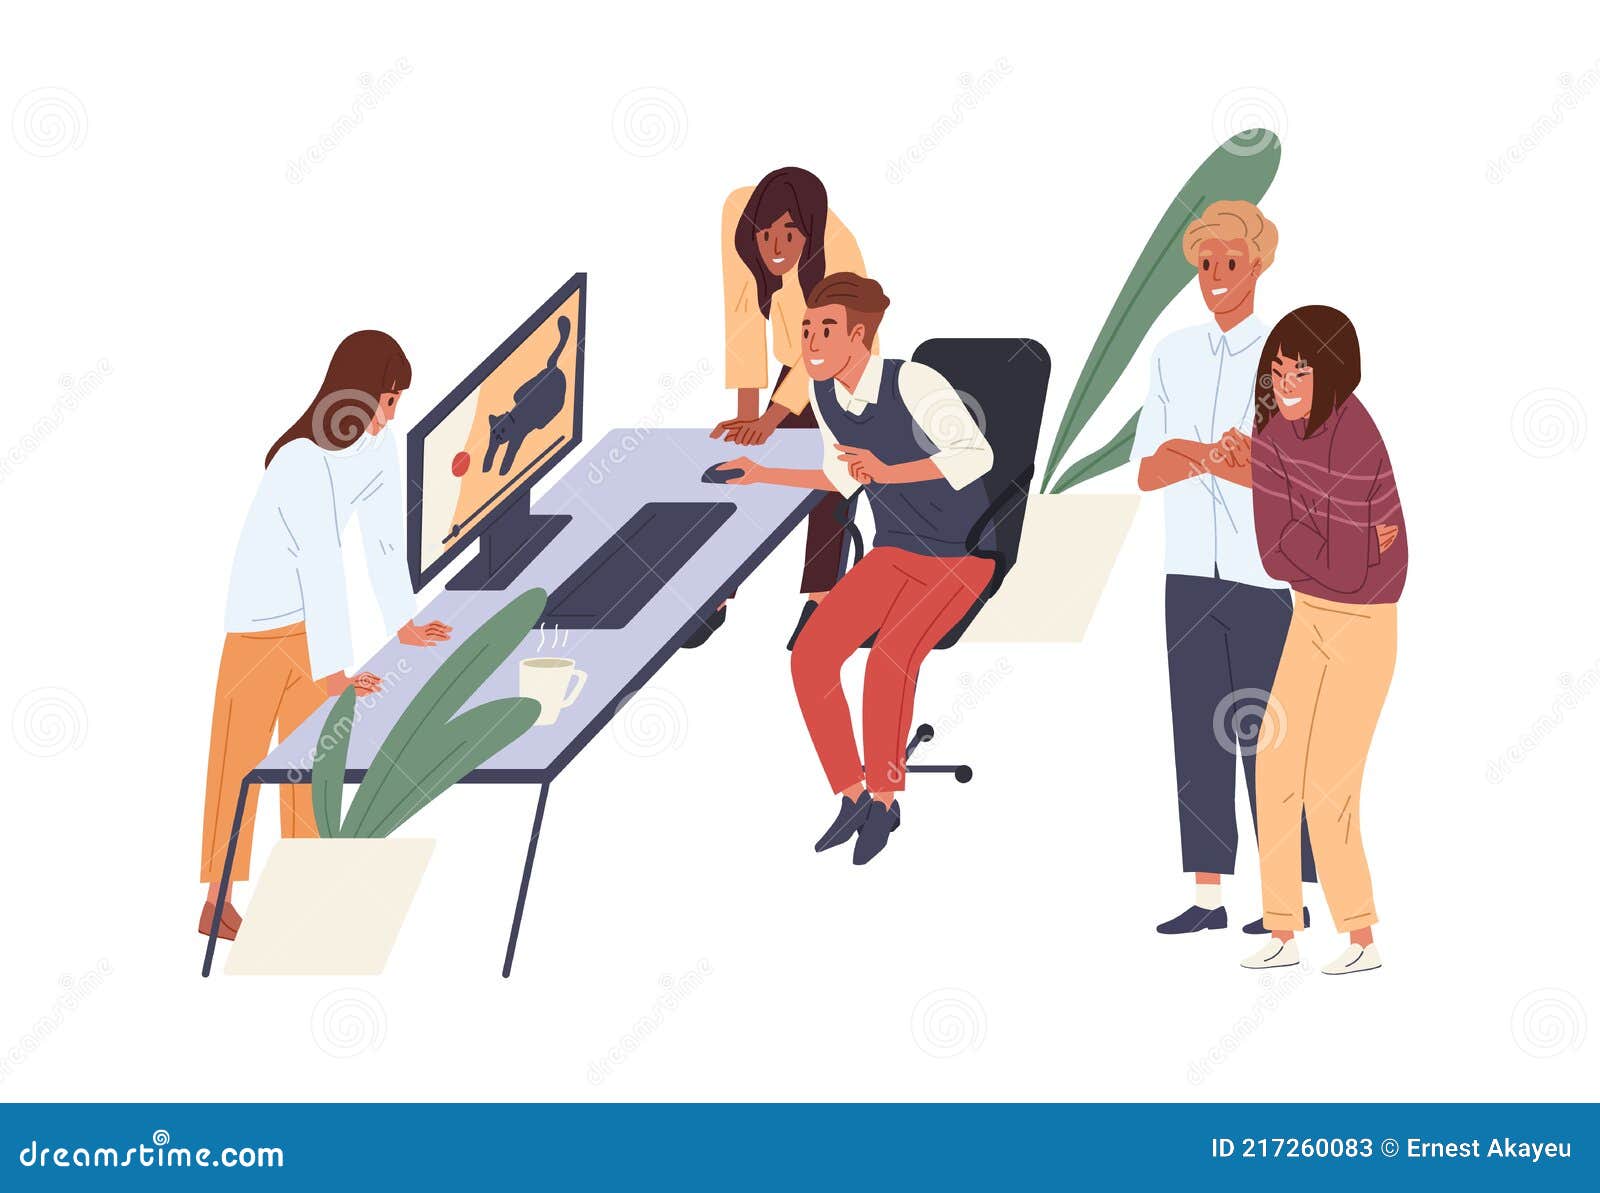 People Having Fun, Laughing and Watching Funny Videos in Office. Colleagues  Spending Time, Entertaining Together at Stock Vector - Illustration of  employee, group: 217260083